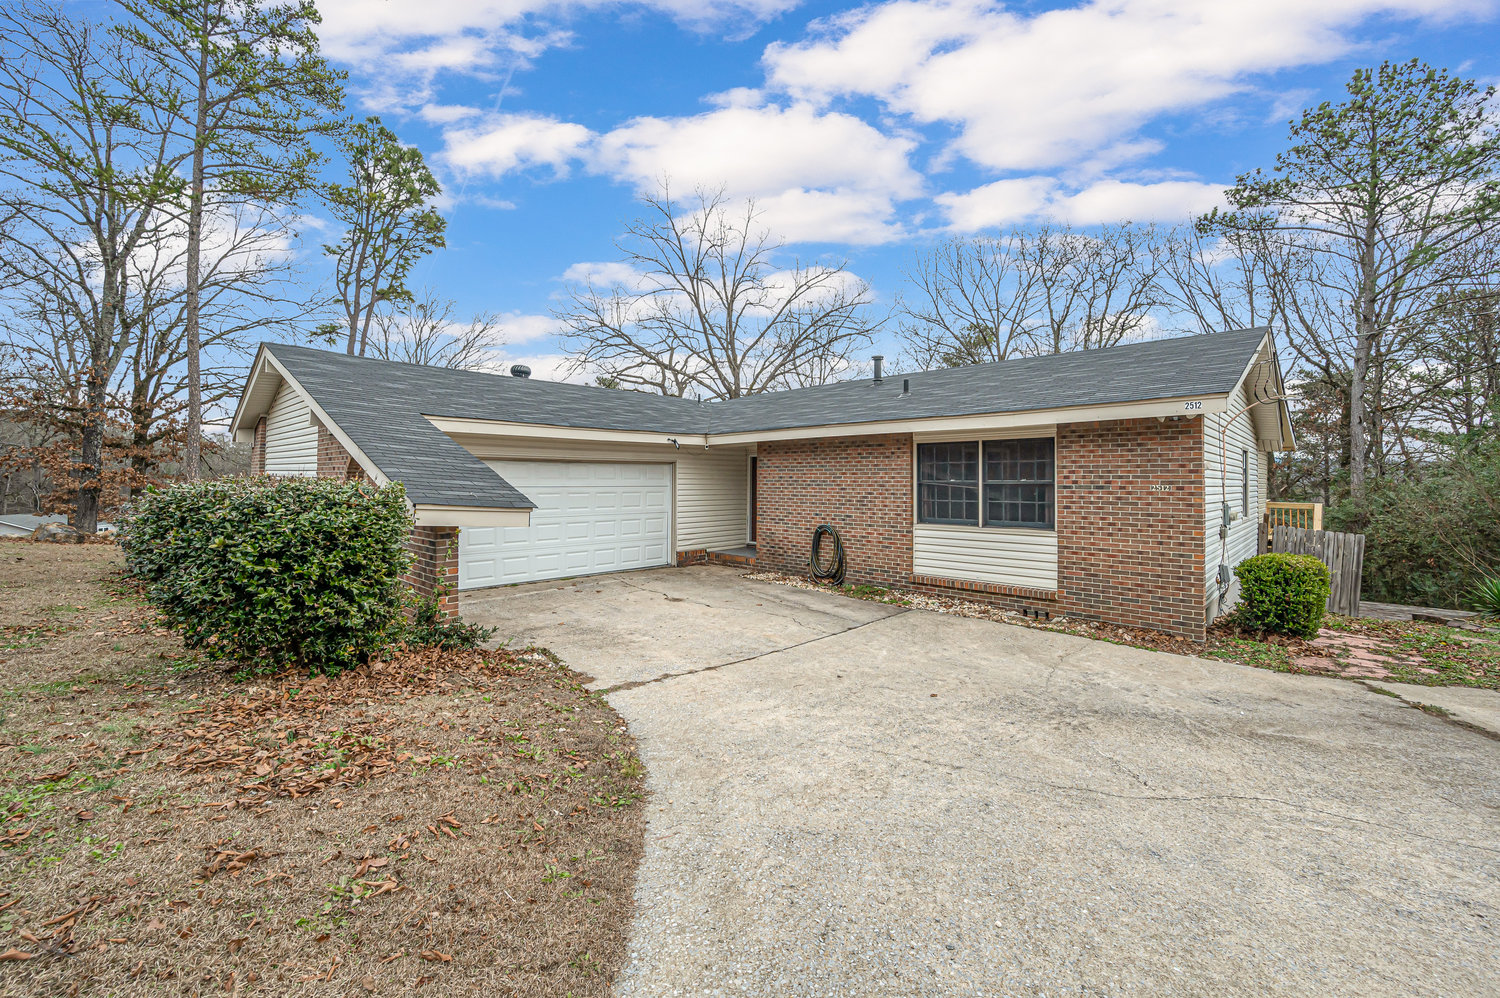 Virtual Tour of Birmingham Metro Real Estate Listing For Sale | 2512 Forest Drive, Moody, AL 35004